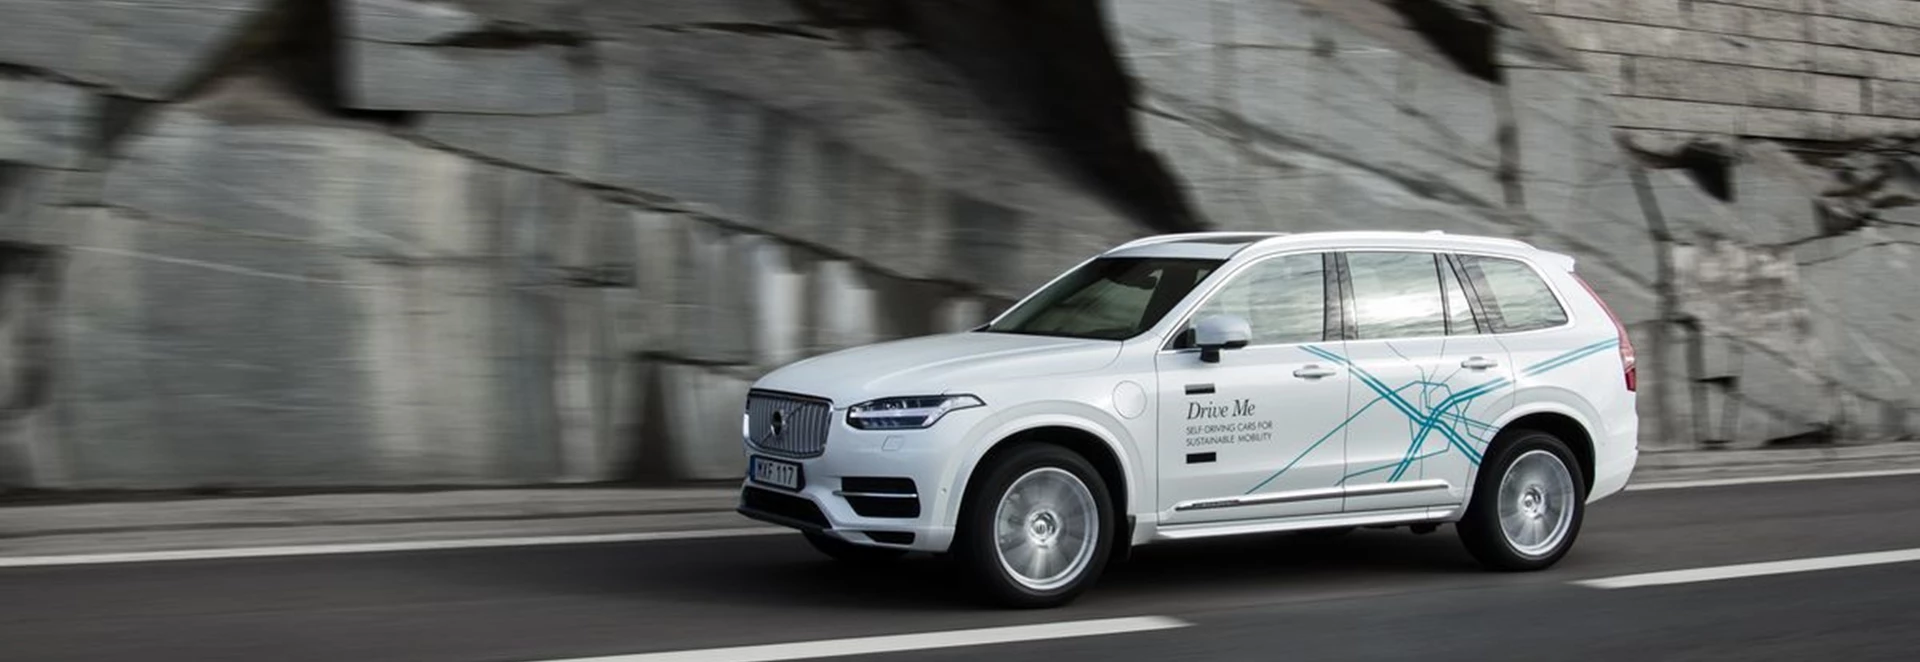 Volvo to put its first electric and autonomous car on sale within next four years